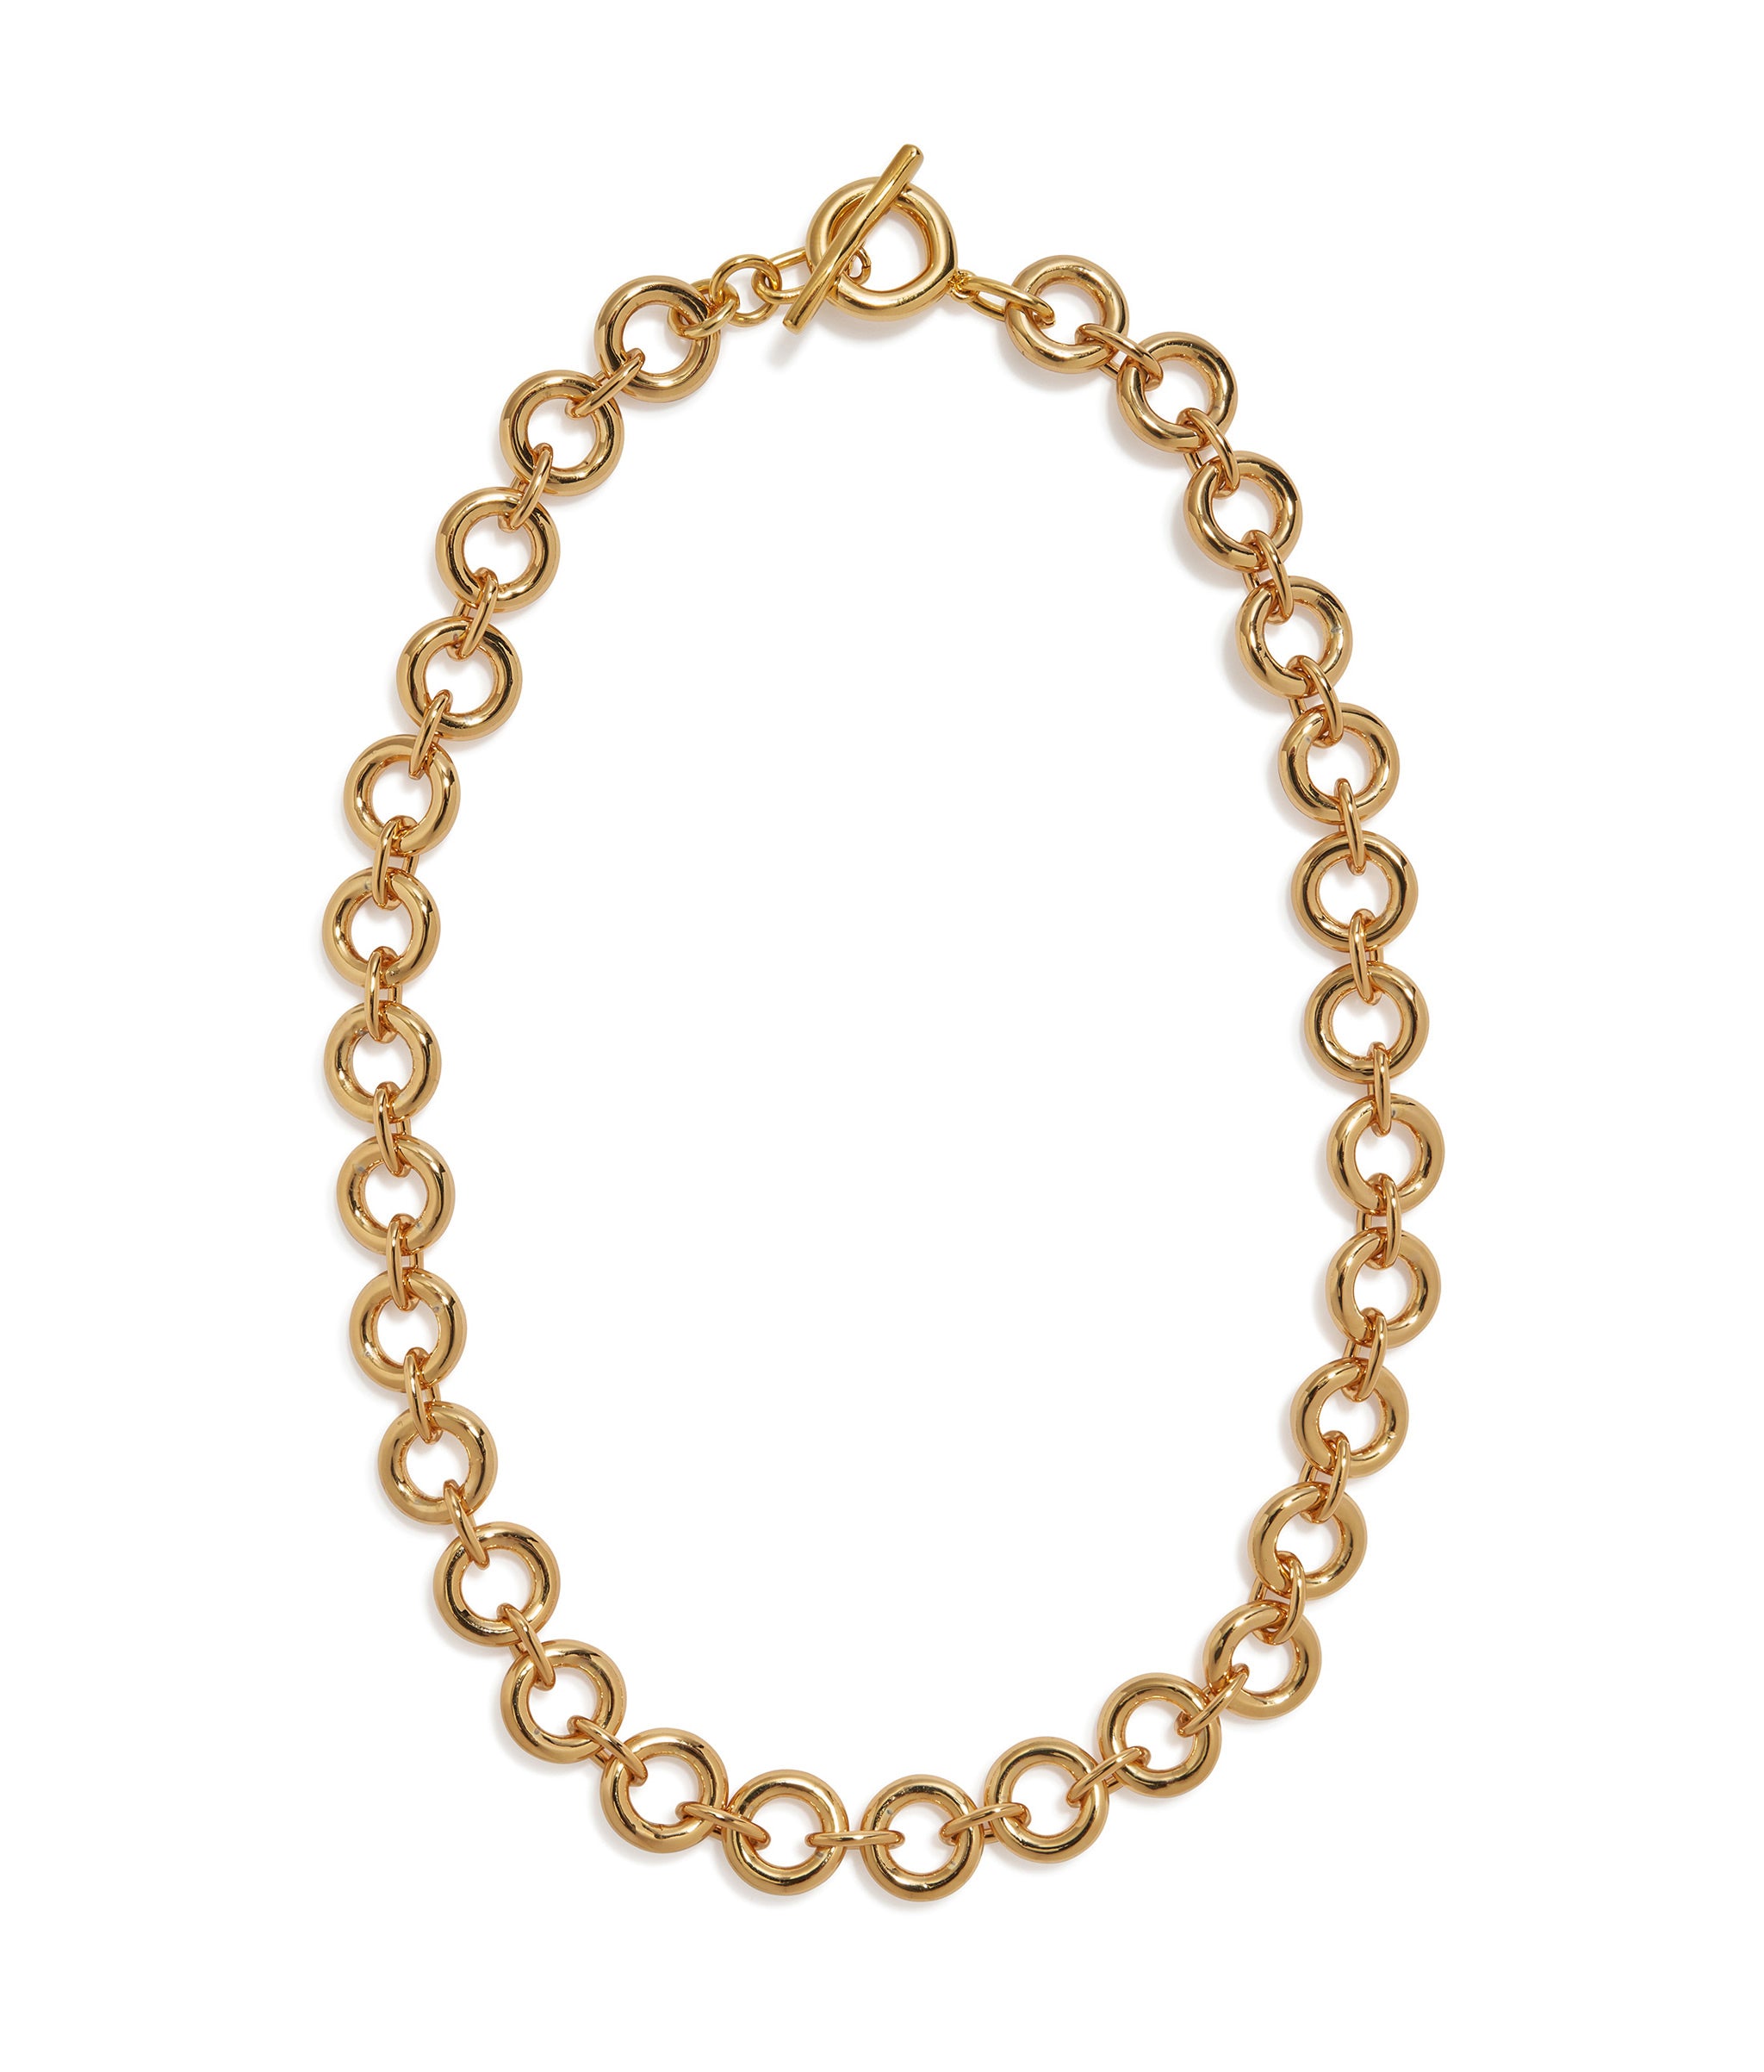 Mood Necklace in Gold. Gold-plated brass circle chain link strand with gold-plated toggle closure.Mood Necklace in Gold. Gold-plated brass round links with a toggle closure.